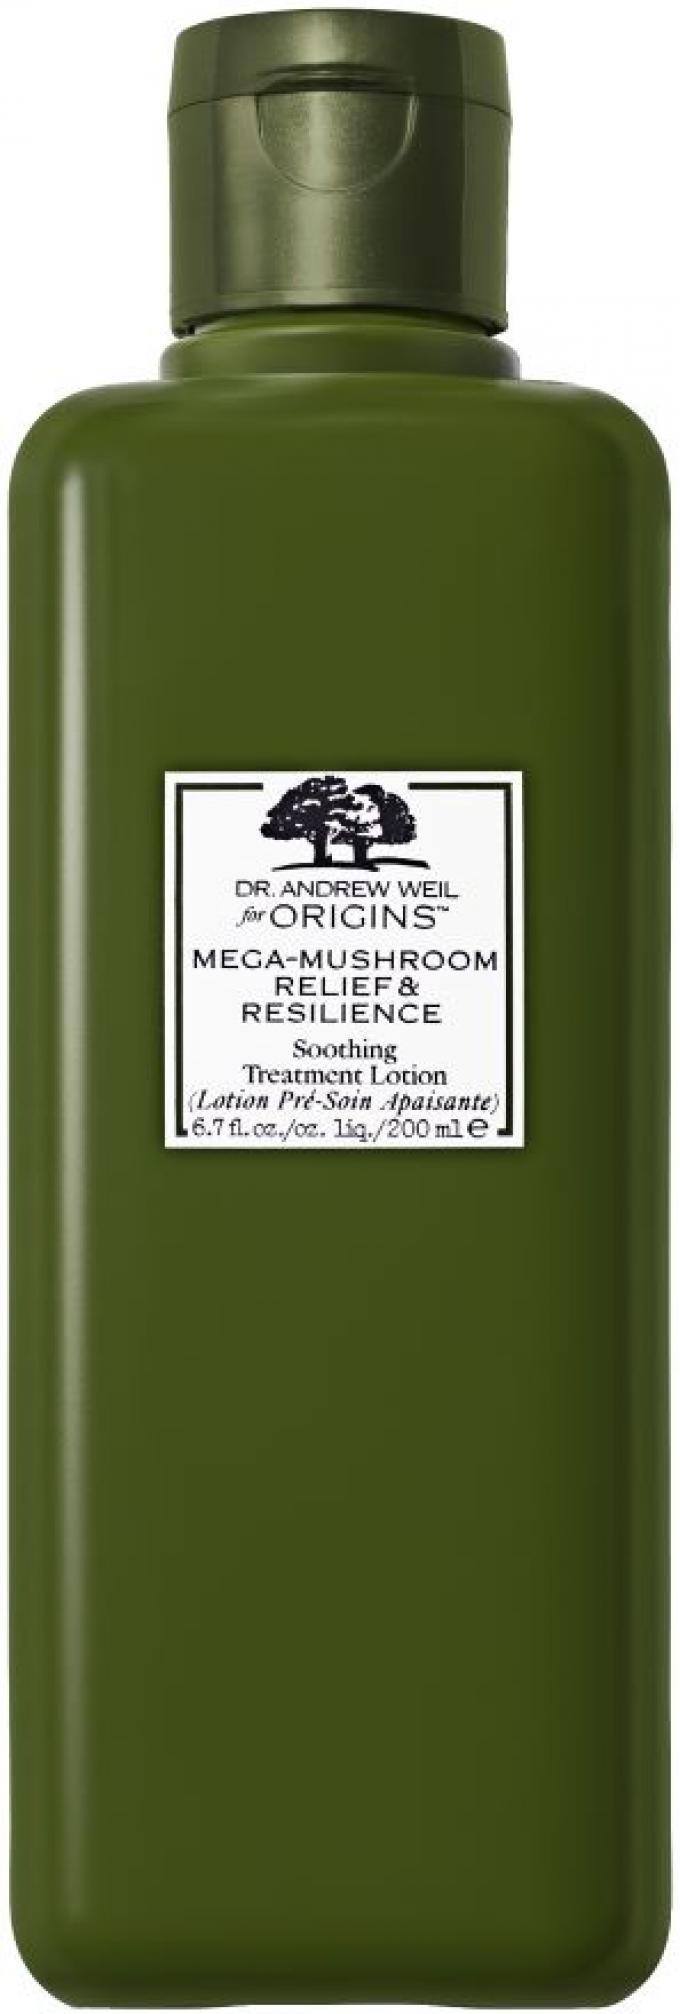 Lotion Dr. Andrew Weil for Origins